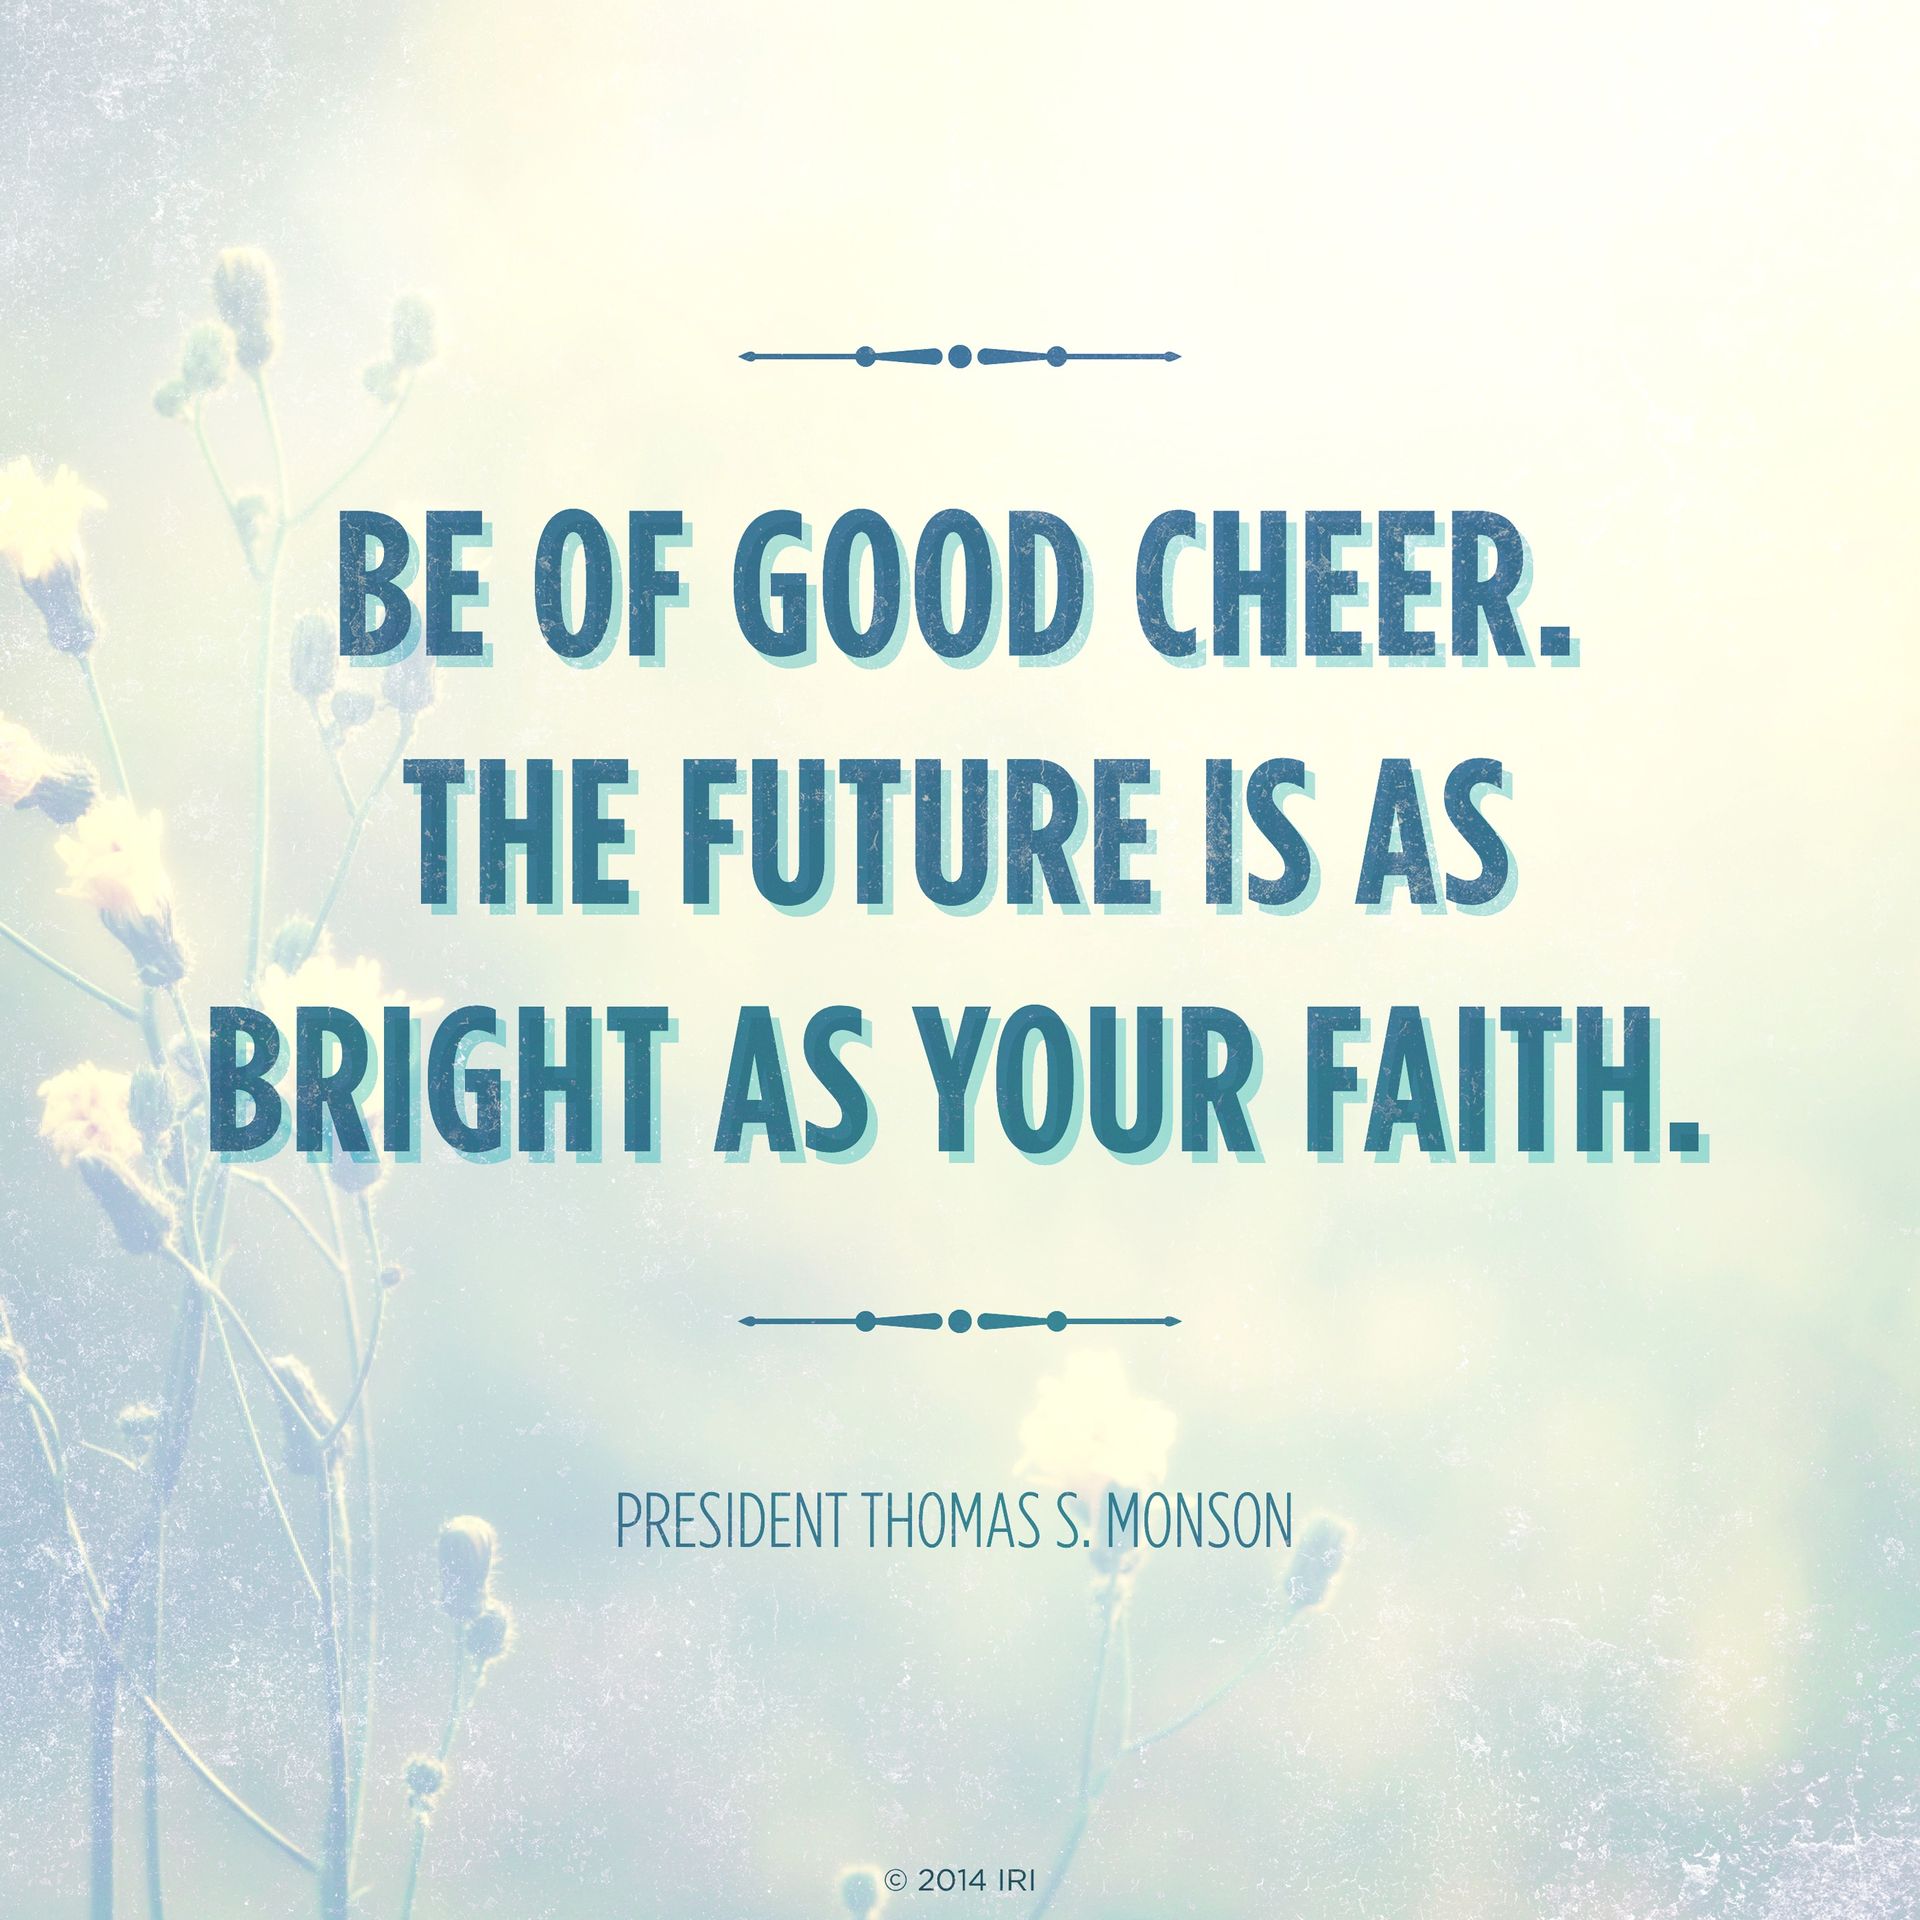 “Be of good cheer. The future is as bright as your faith.”—President Thomas S. Monson, “Be of Good Cheer”